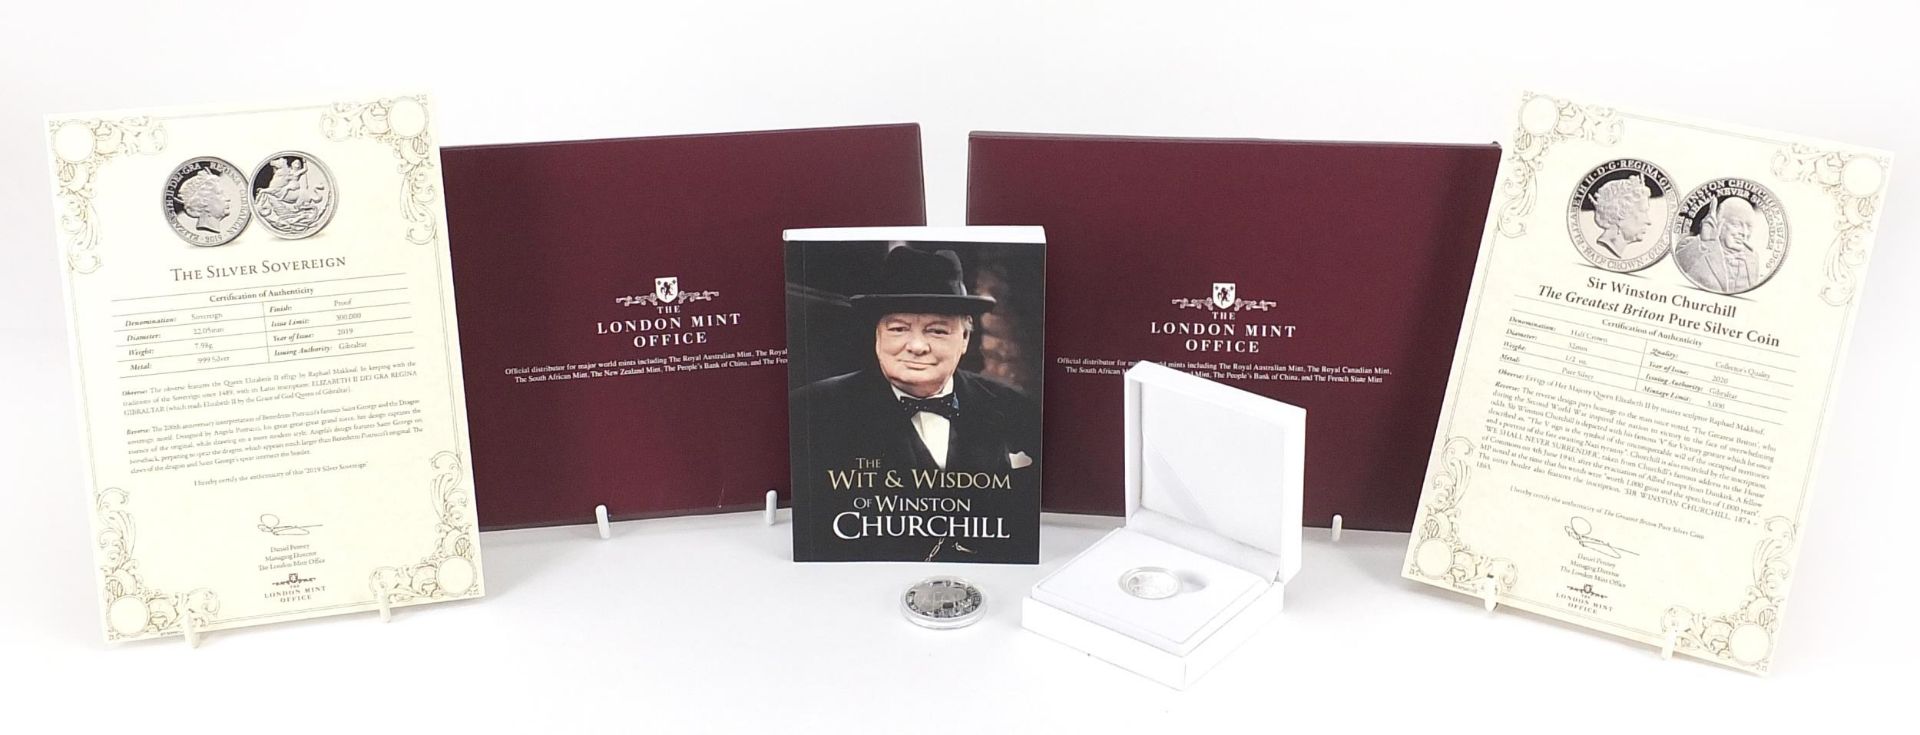 Elizabeth II 2019 silver sovereign and a silver proof half crown commemorating Sir Winston Churchill